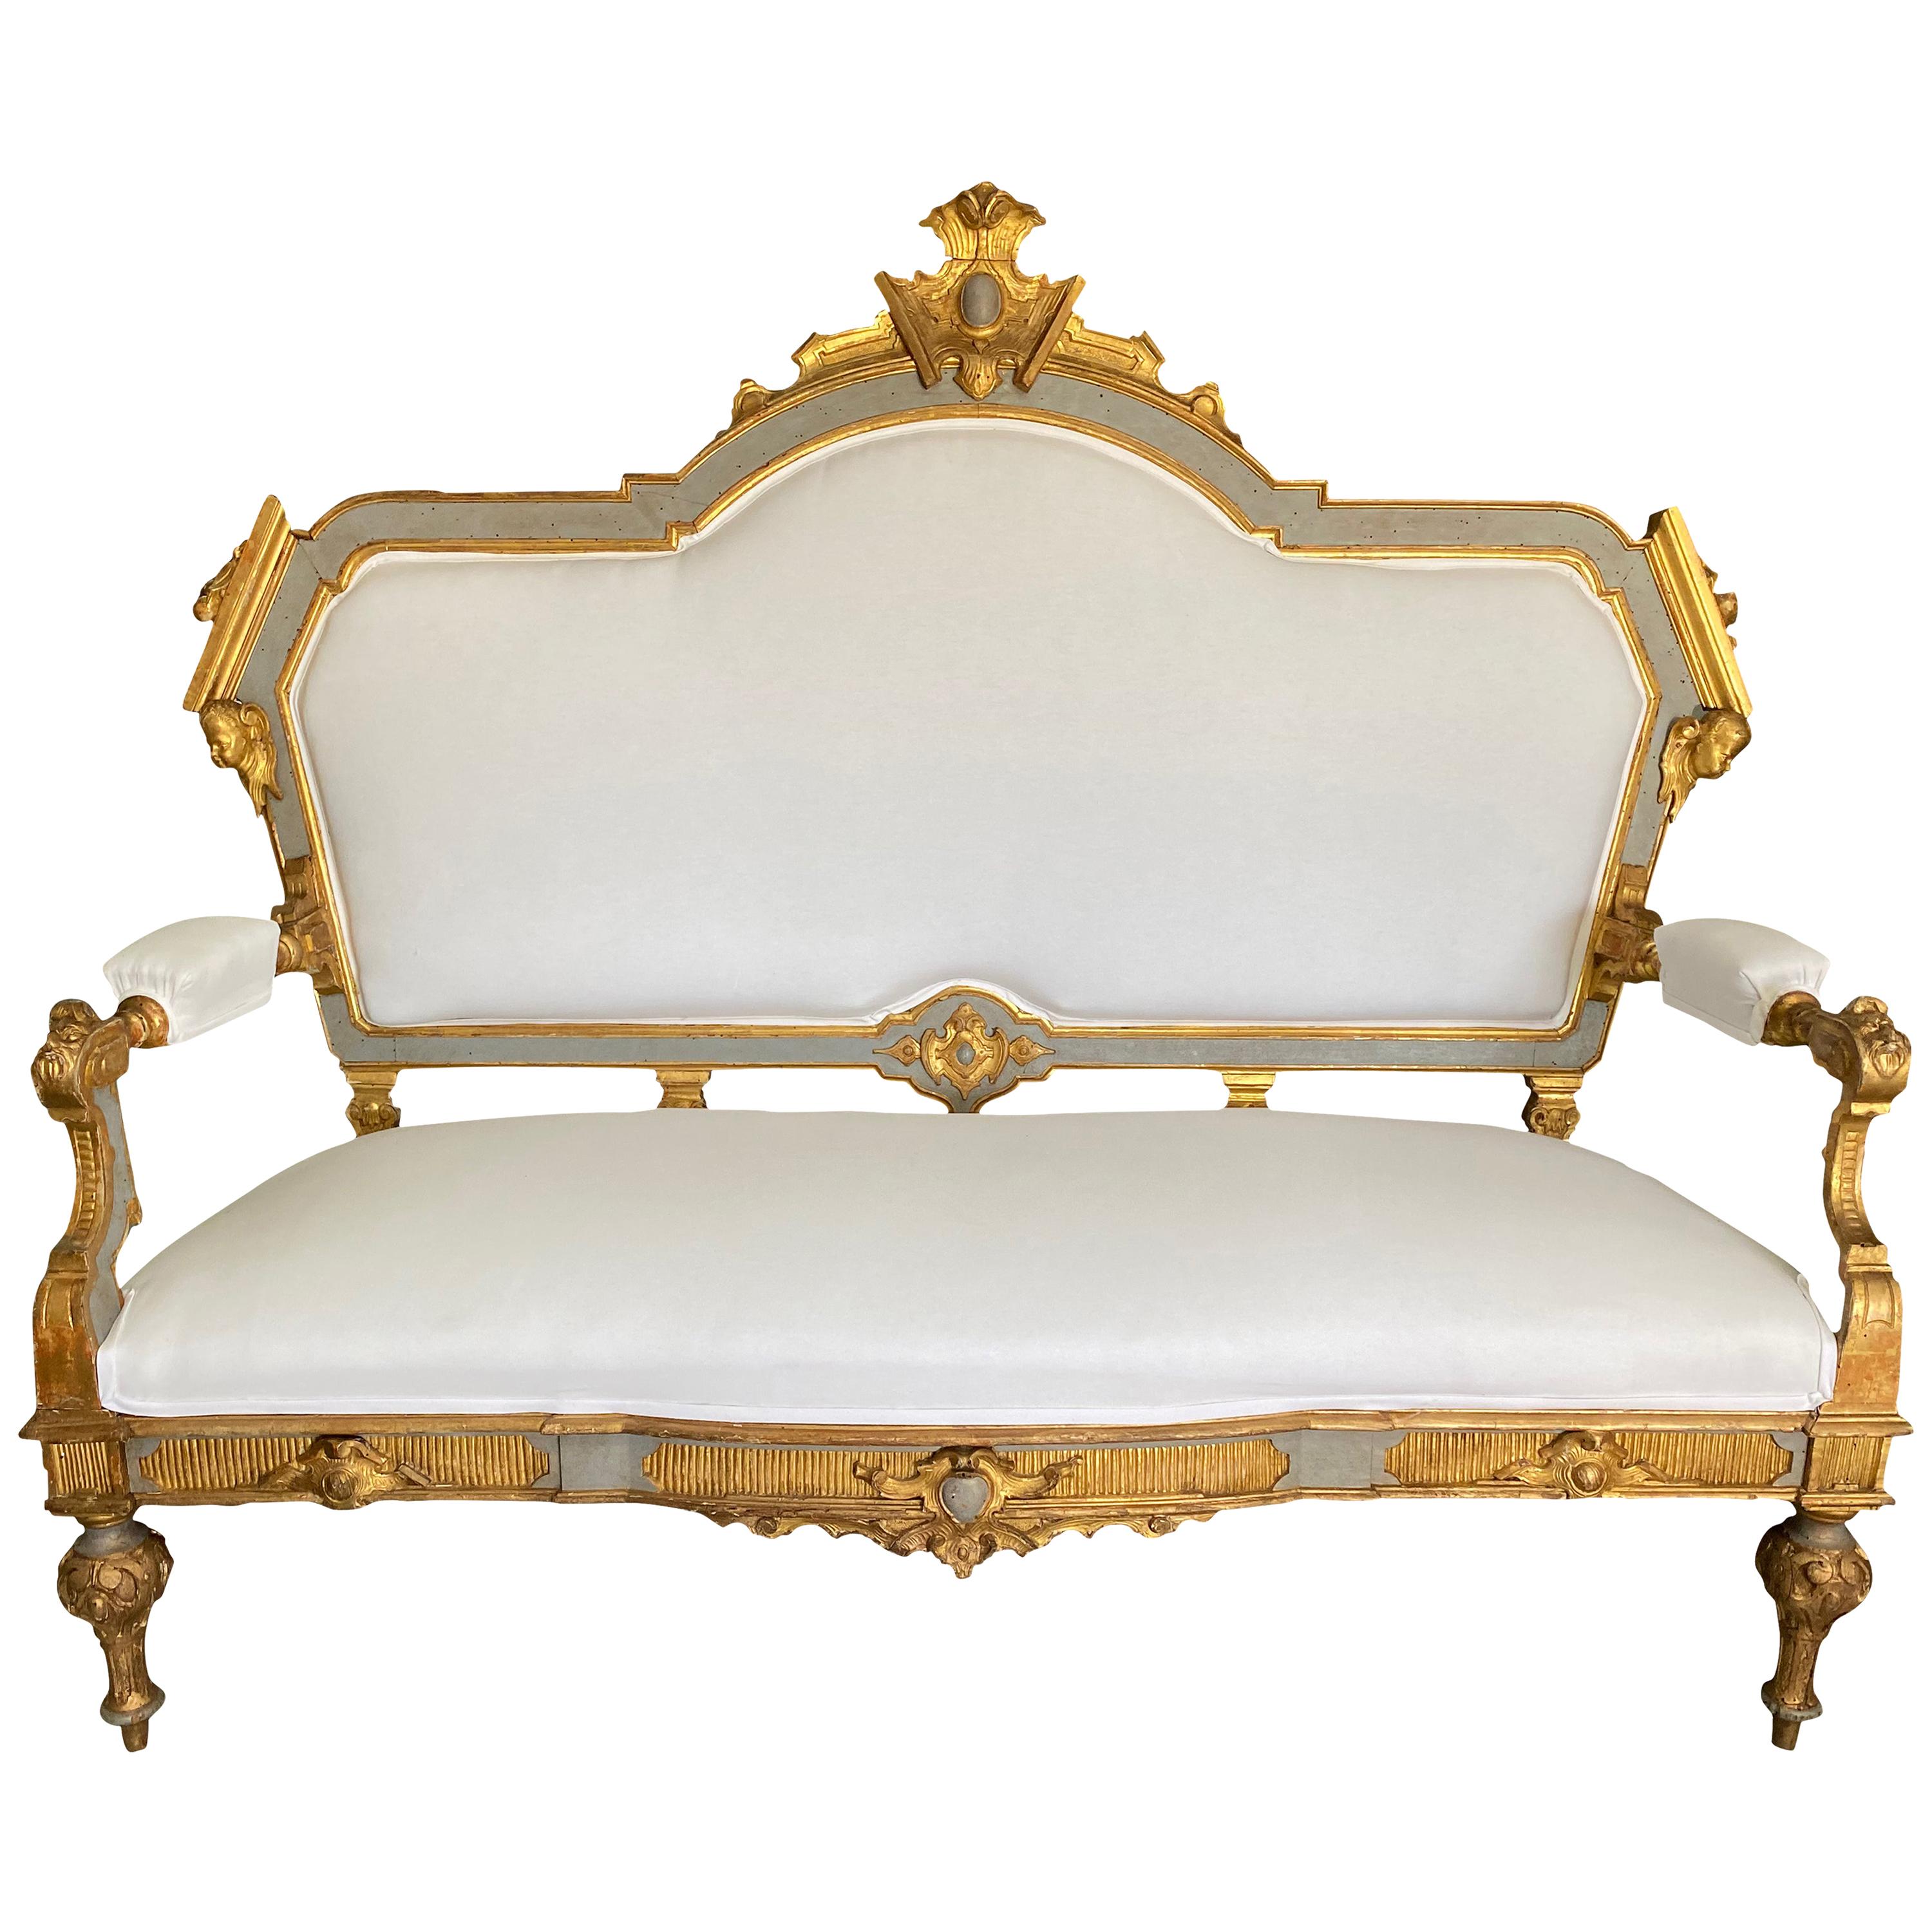 18th Century Italian Blue and Gilt Settee with Putti an Ornate Carved Details